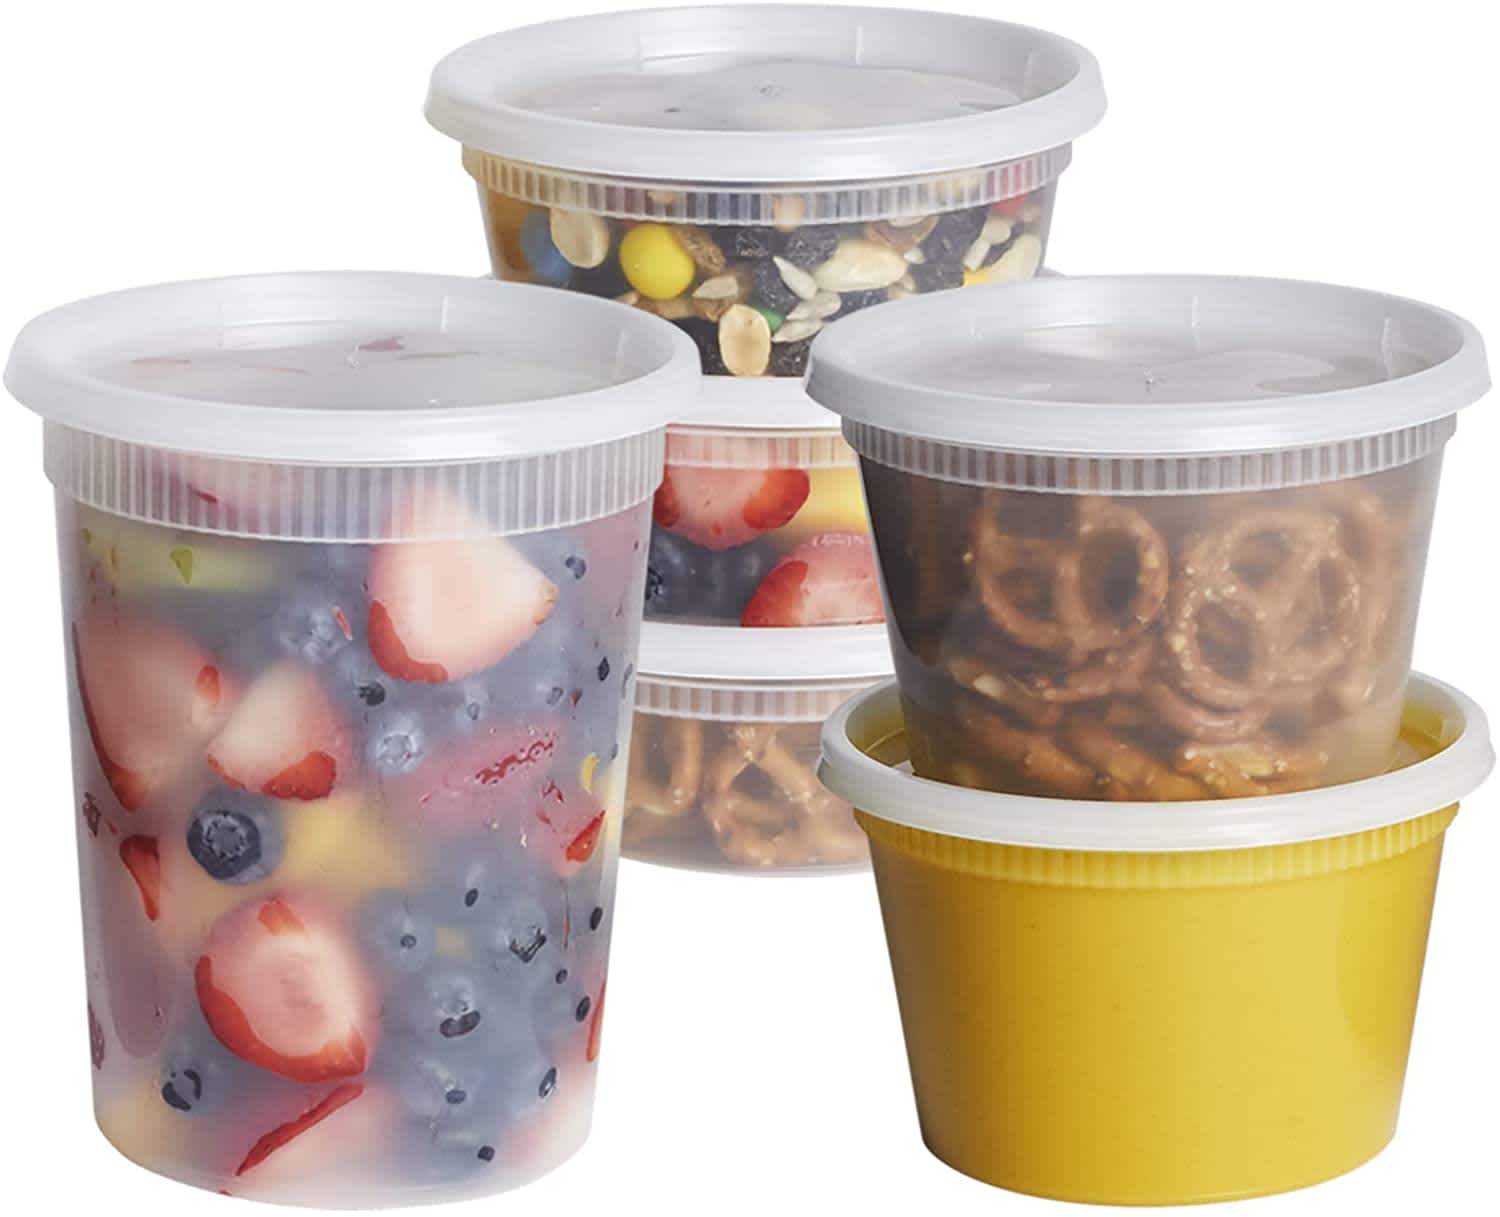 Deli Containers Are the Answer to Your Food Storage Needs